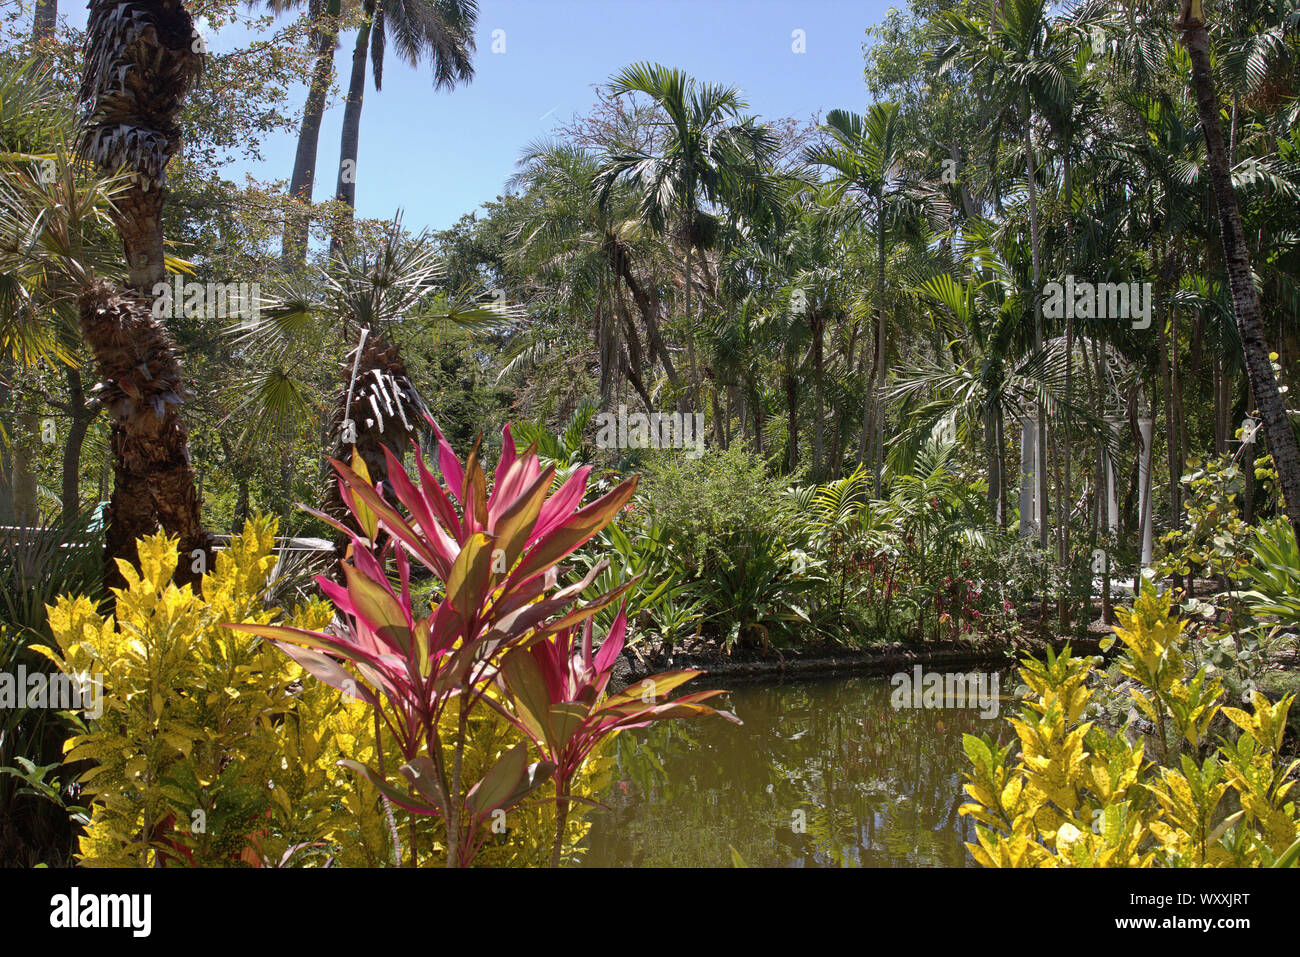 The lushness of the Garden of the Groves on Grand Bahama Island.  Photograph take in April 2018 - well before the destruction of Hurricane Dorian. Stock Photo